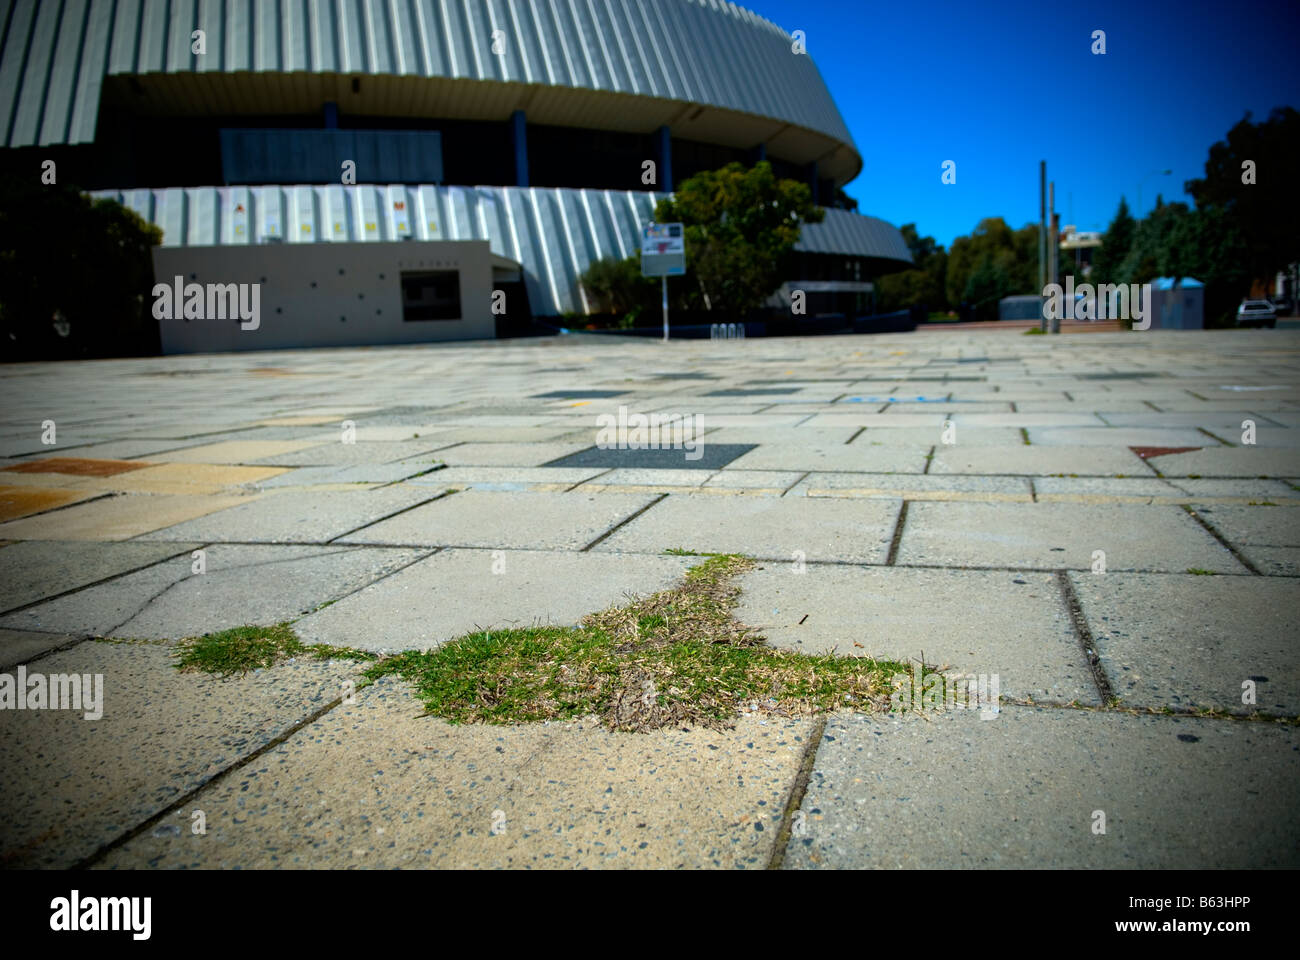 Small patch of grass growing amongst concrete, disused Perth Entertainment Centre in background. Perth, Western Australia Stock Photo